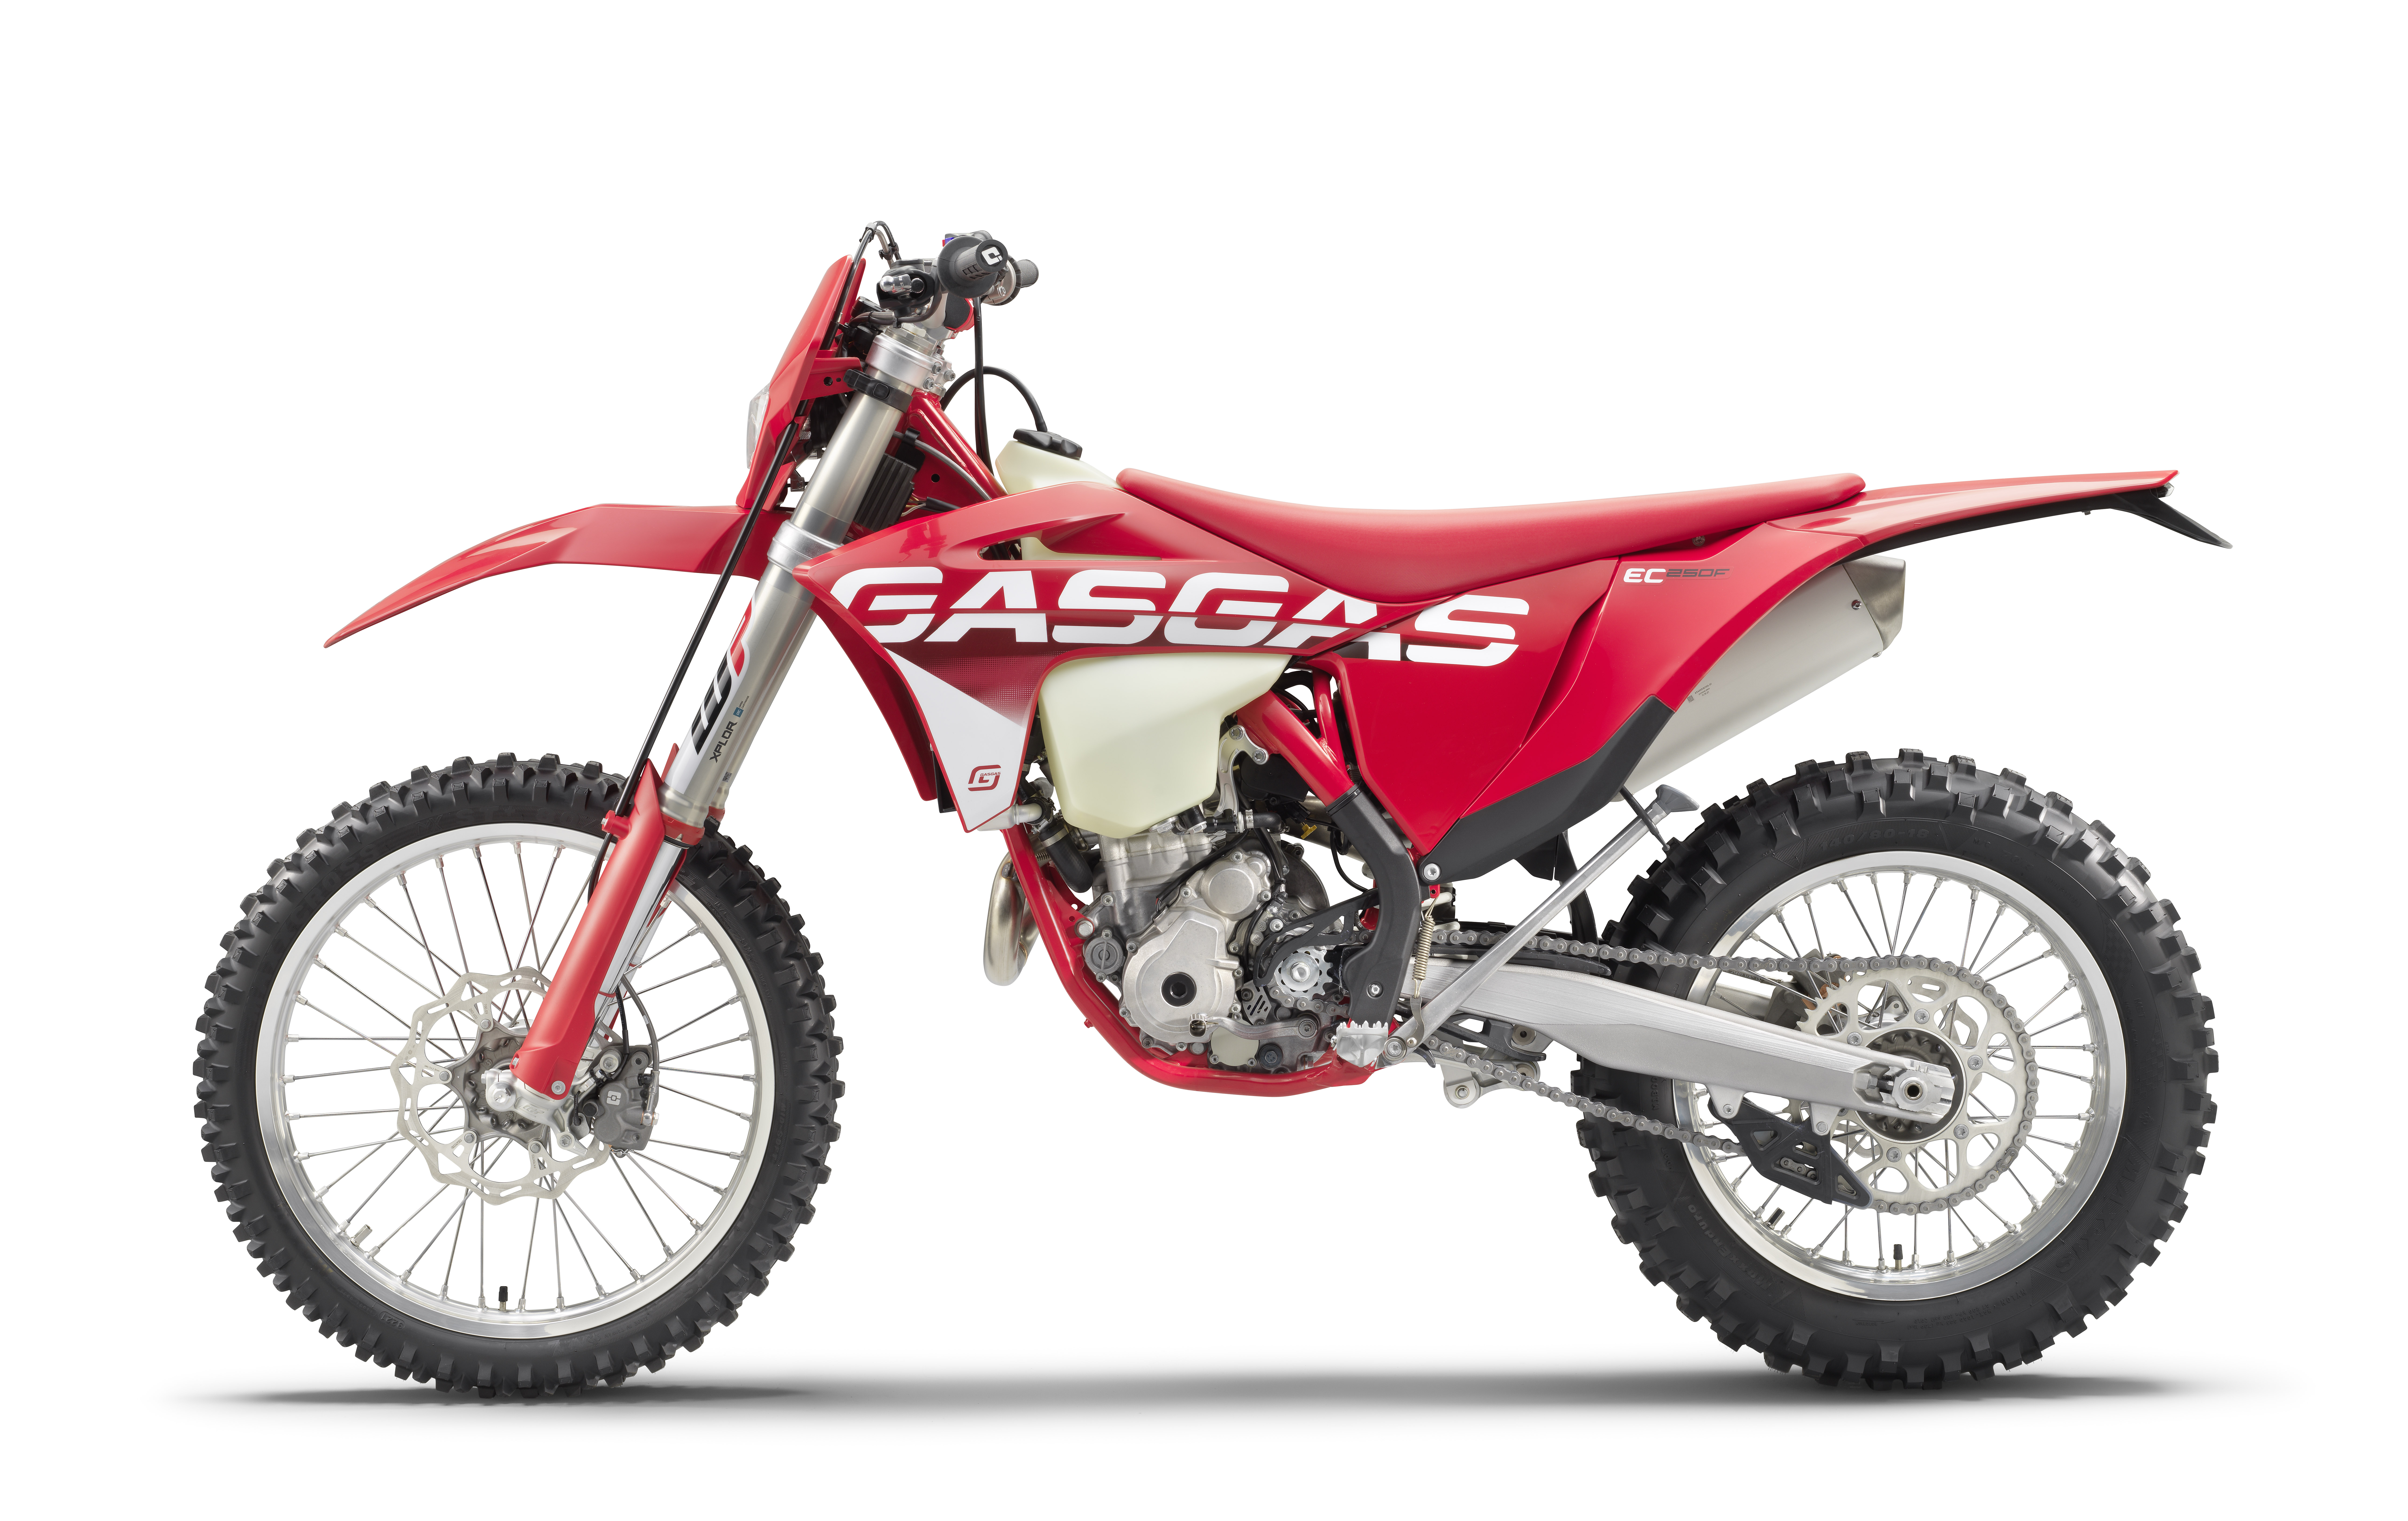 GasGas motorcycles now in Malaysia, enduro and motocross, range from RM39,500 to RM48,000 1493381